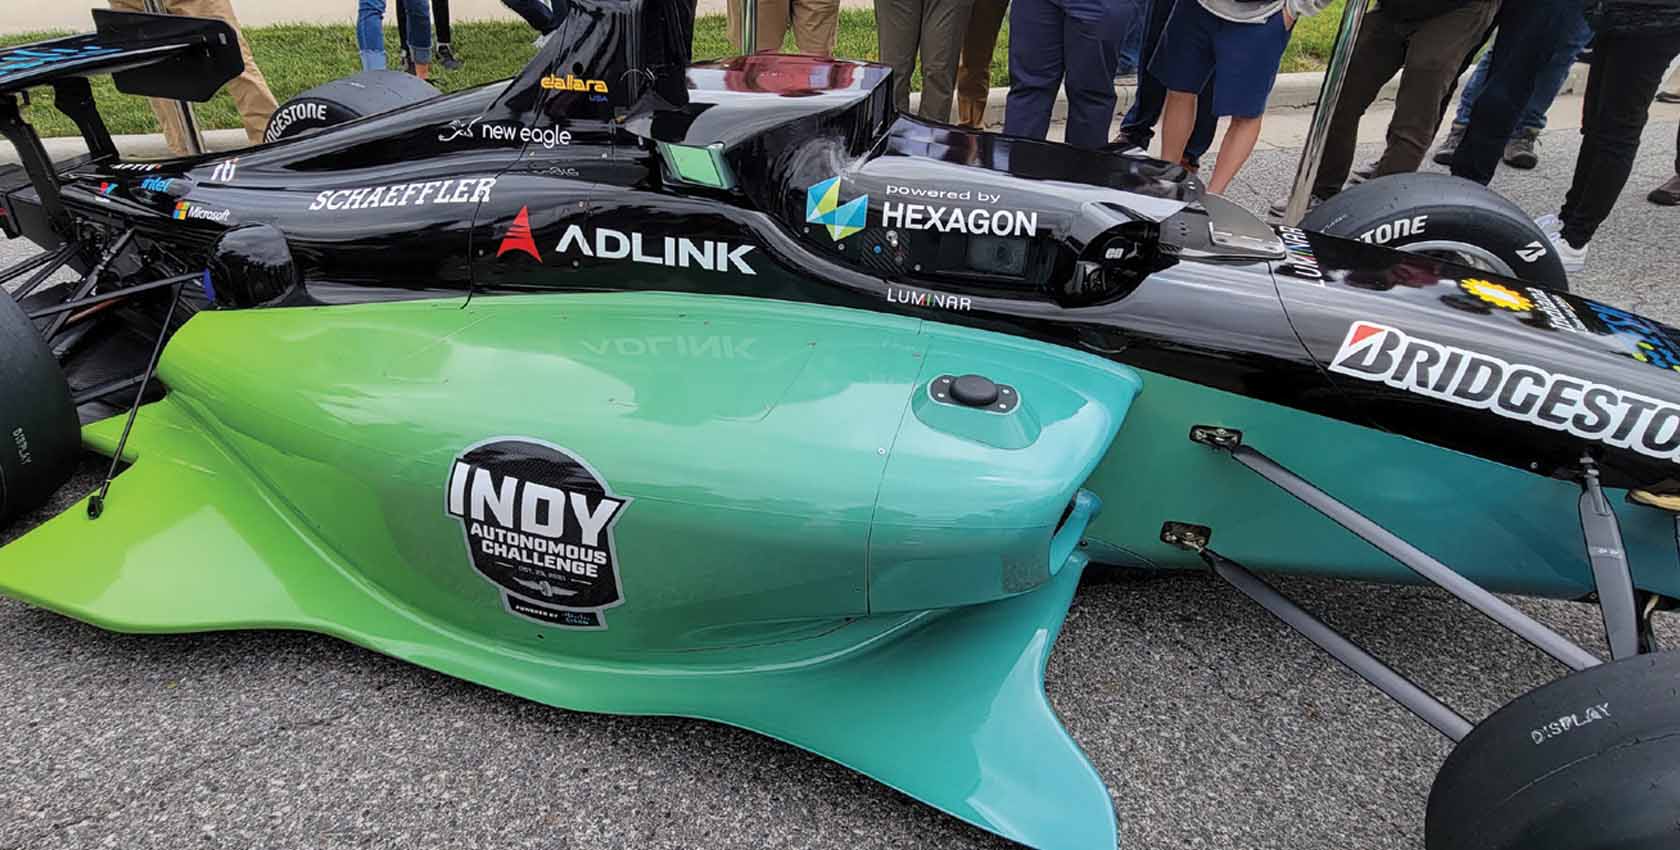 Close up view of green Hexagon branded Indy car